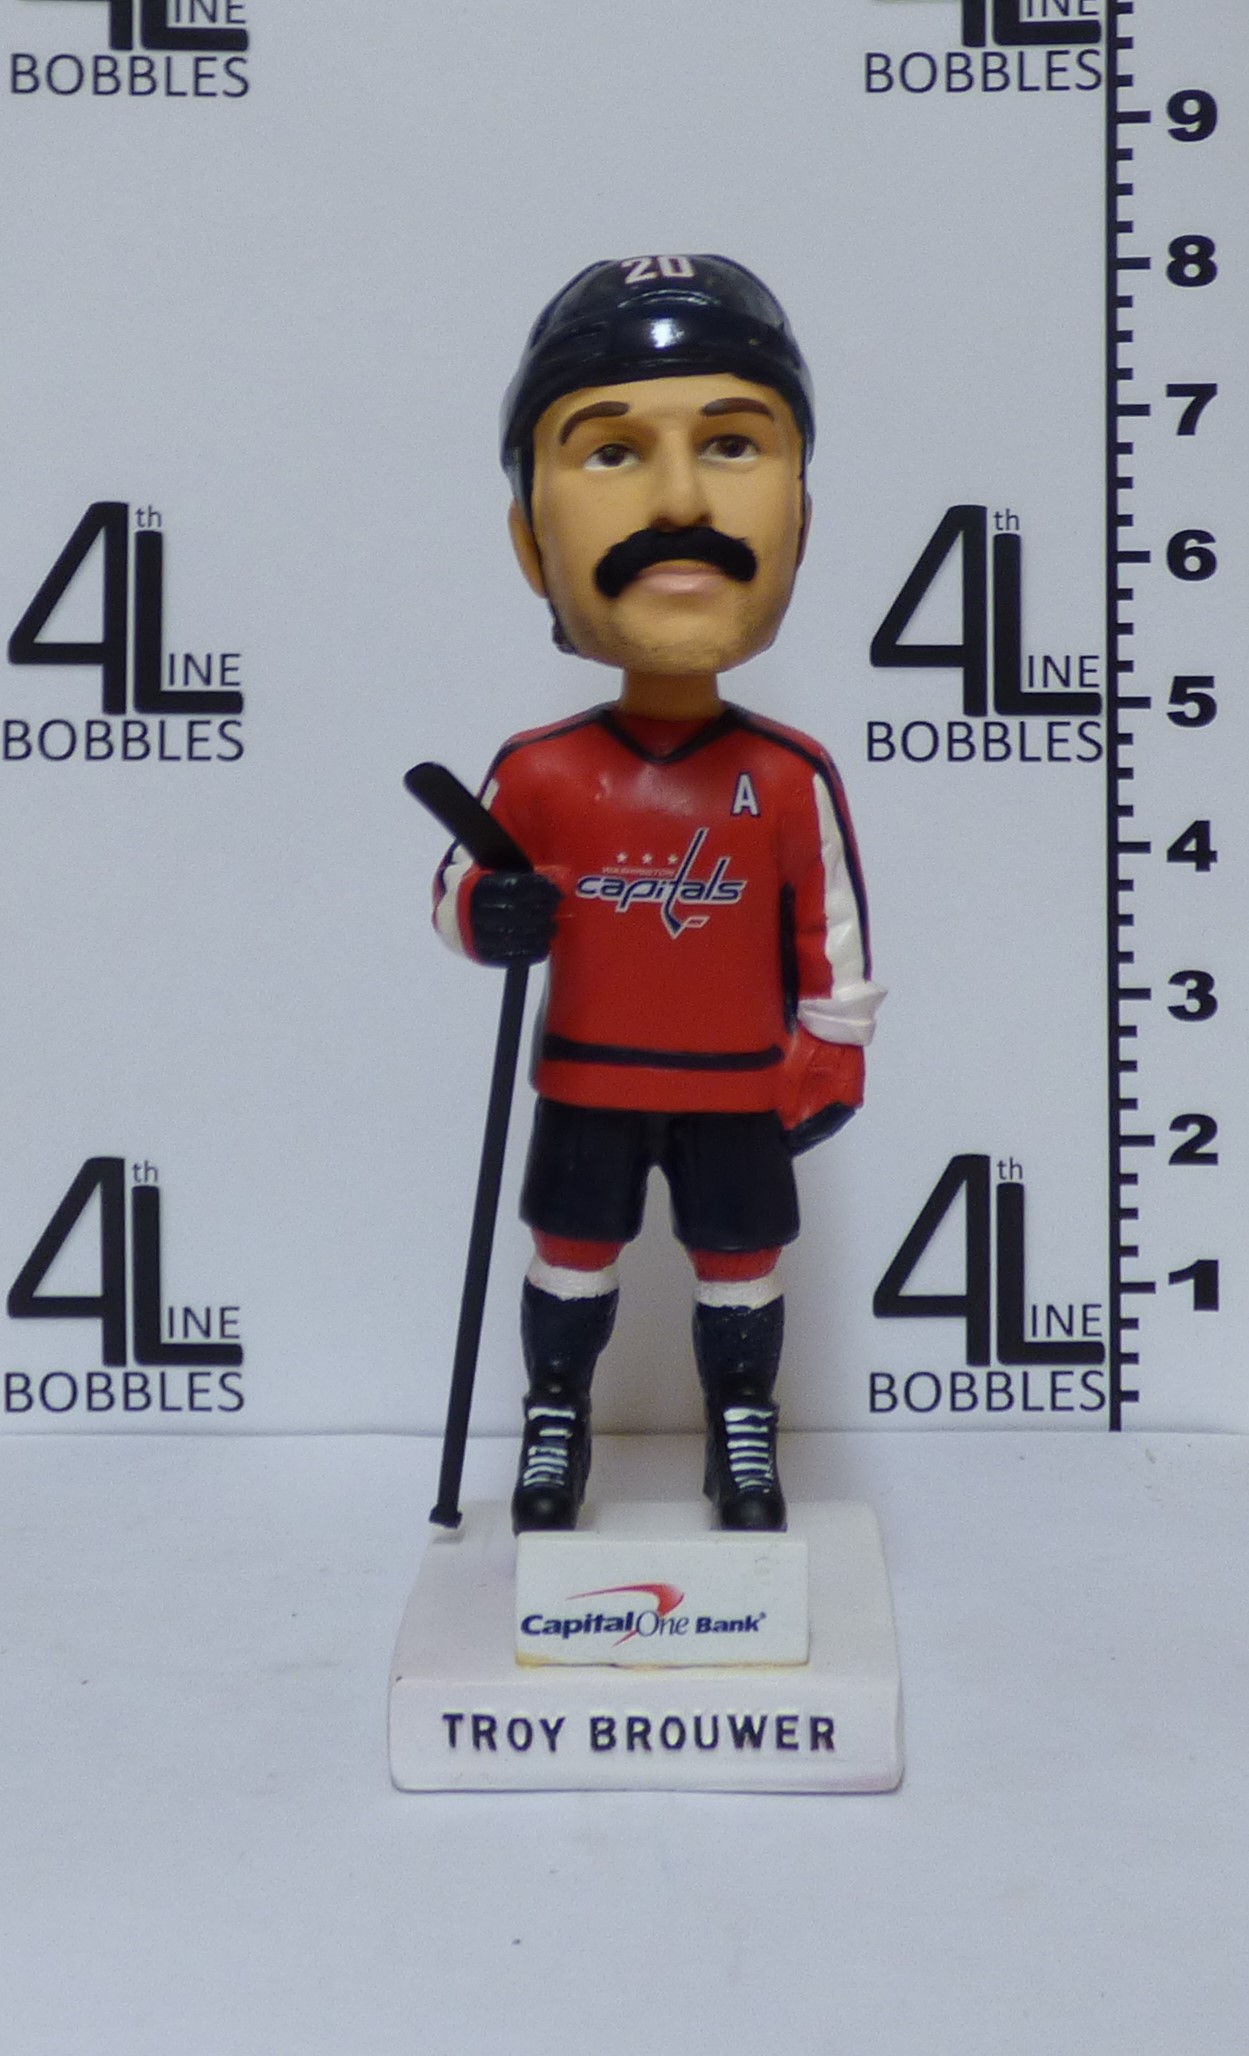 Troy Brouwer bobblehead